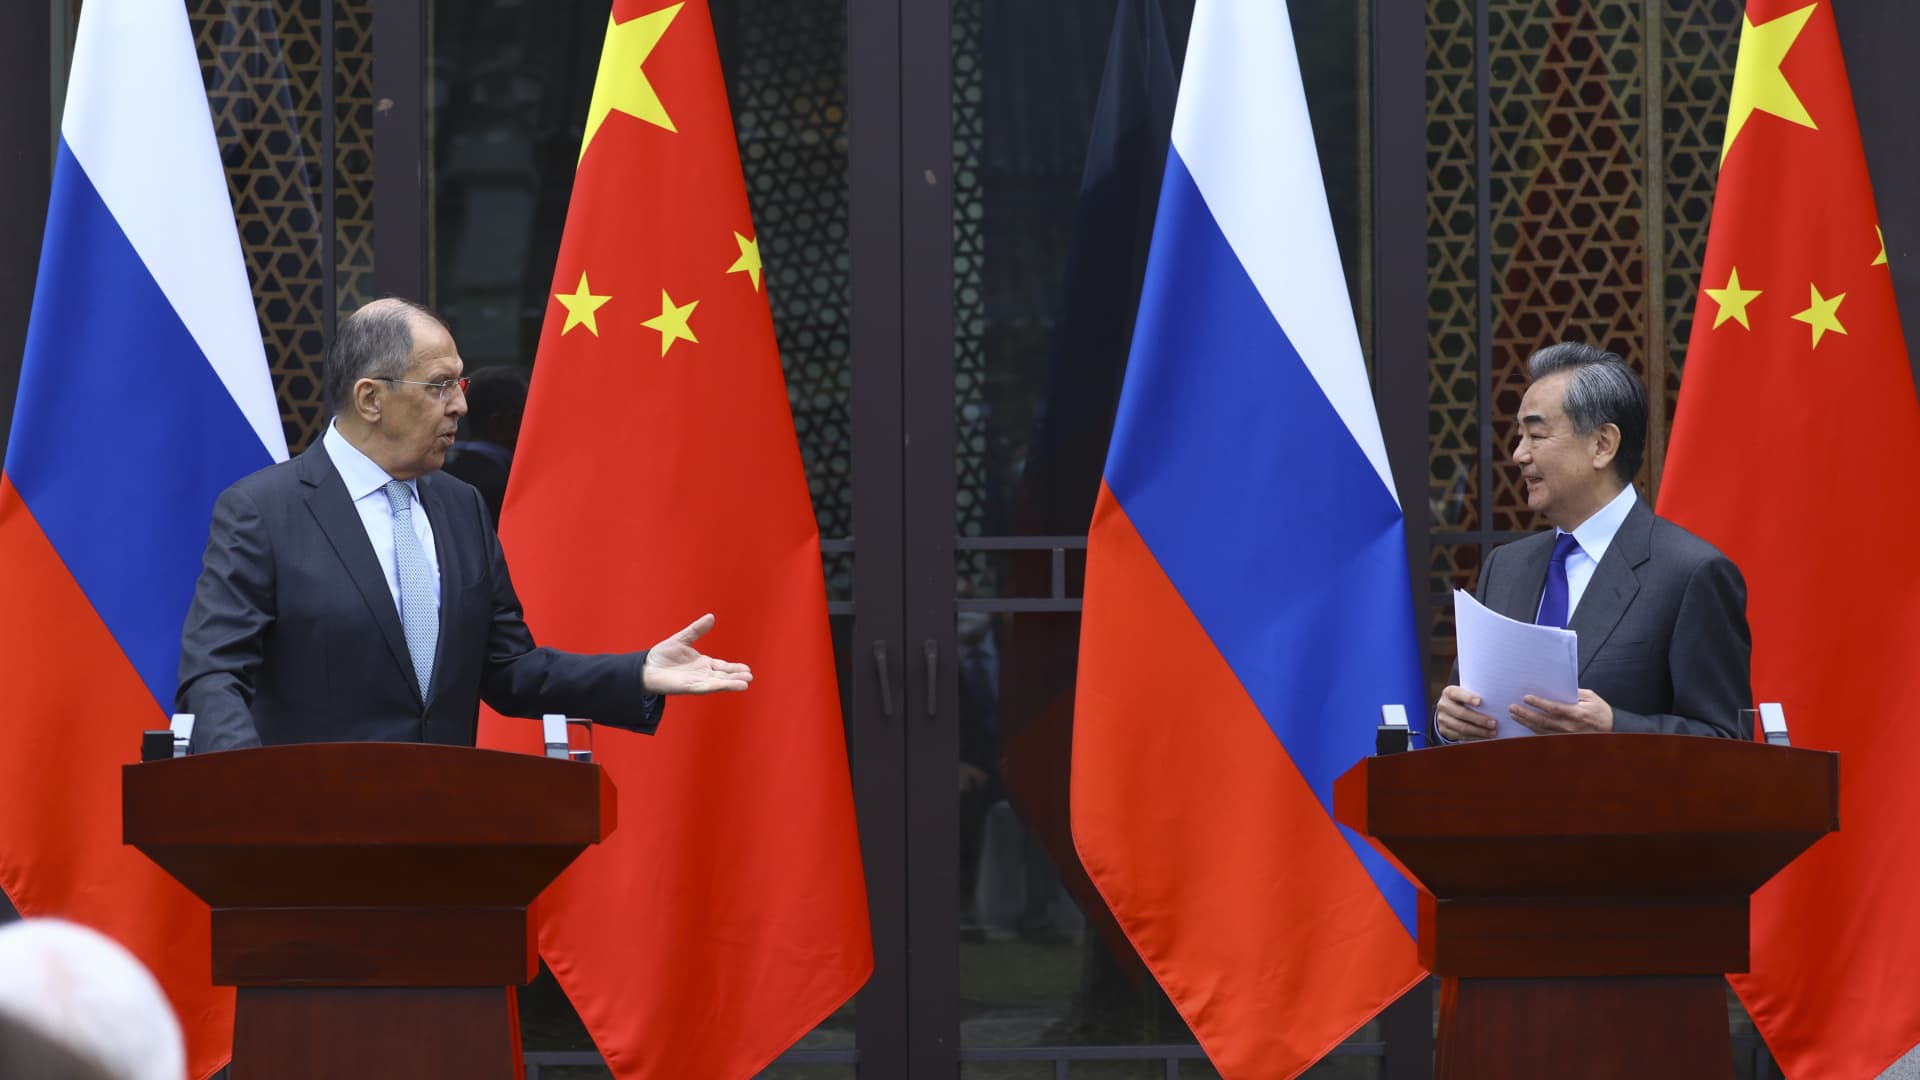 Chinese Foreign Minister Wang Yi and Russian Foreign Minister Sergei Lavrov meeting on the sidelines of a G-20 summit in Bali, Indonesia in 2021.